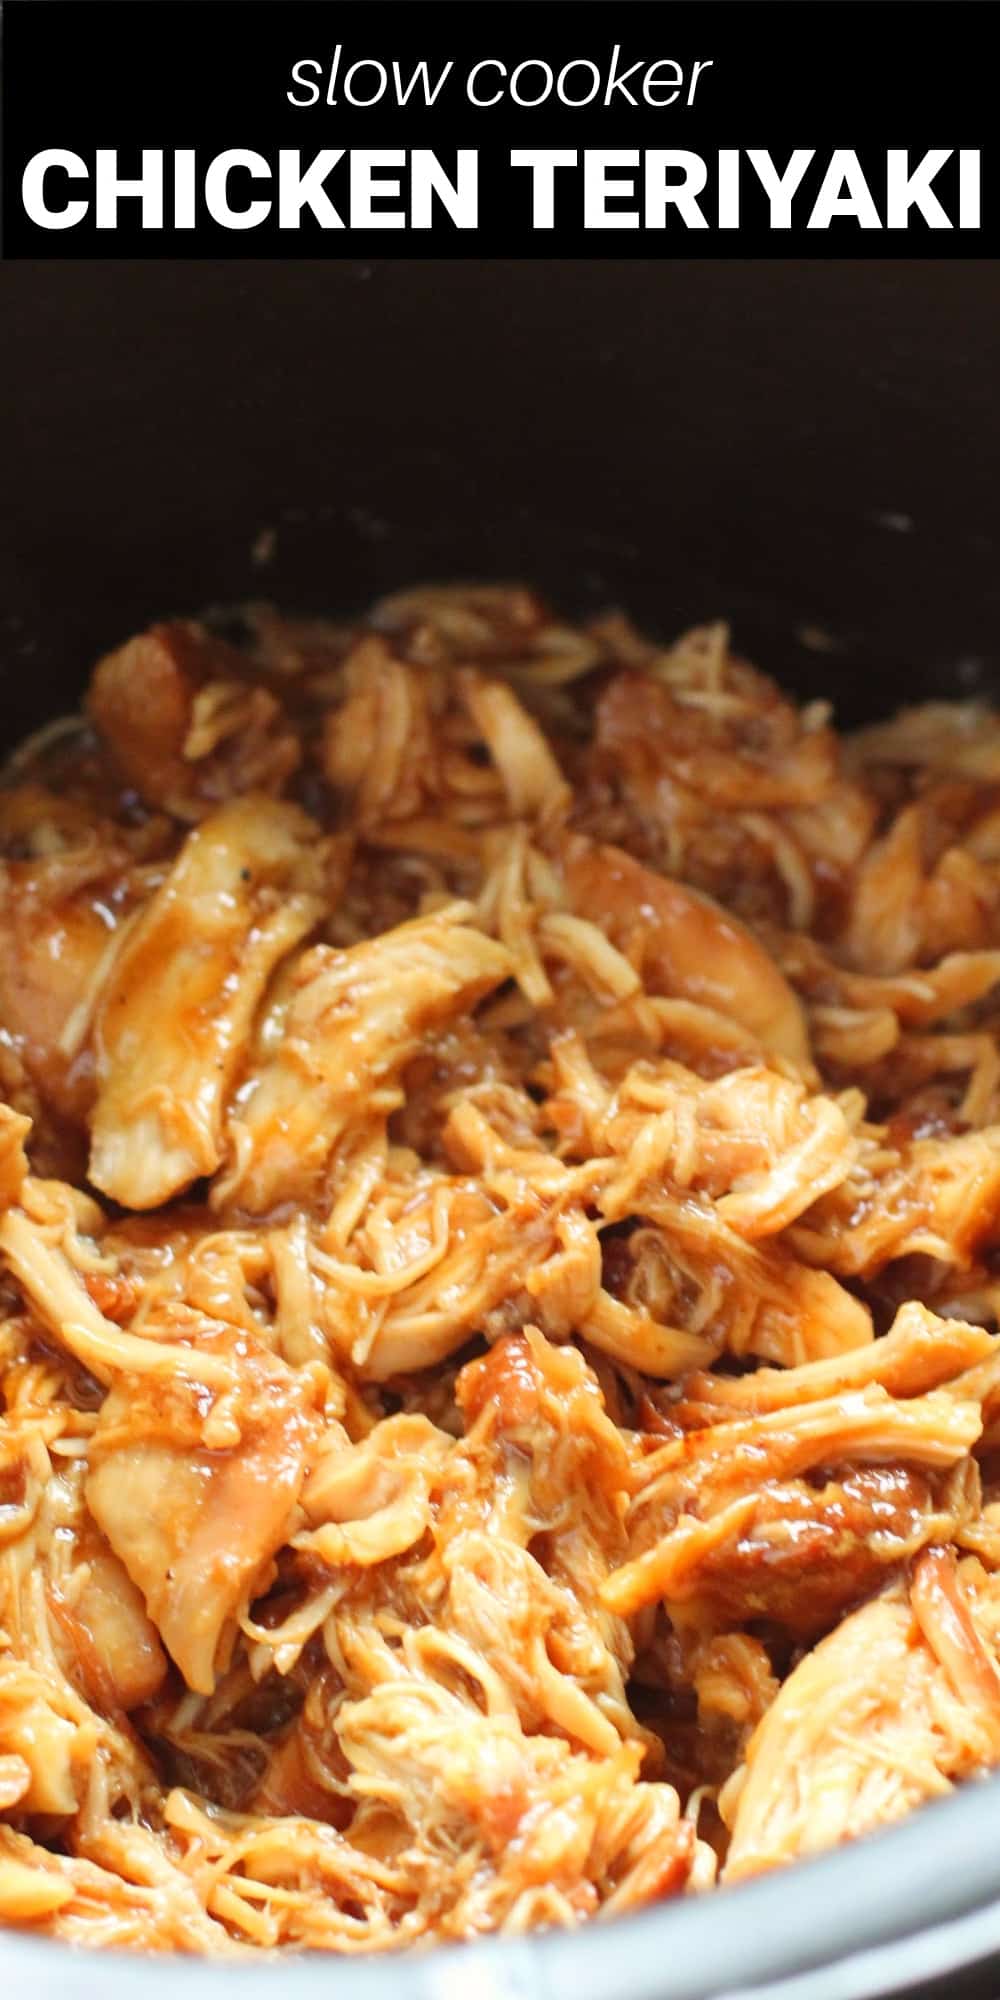 This super easy Slow Cooker Teriyaki Chicken recipe is so much better than take-out and will quickly become a new family favorite! Tender shredded chicken strips and a scrumptious homemade sweet and sticky sauce all cooks in the crockpot making an amazingly simple and delicious meal, perfect for busy weeknights!